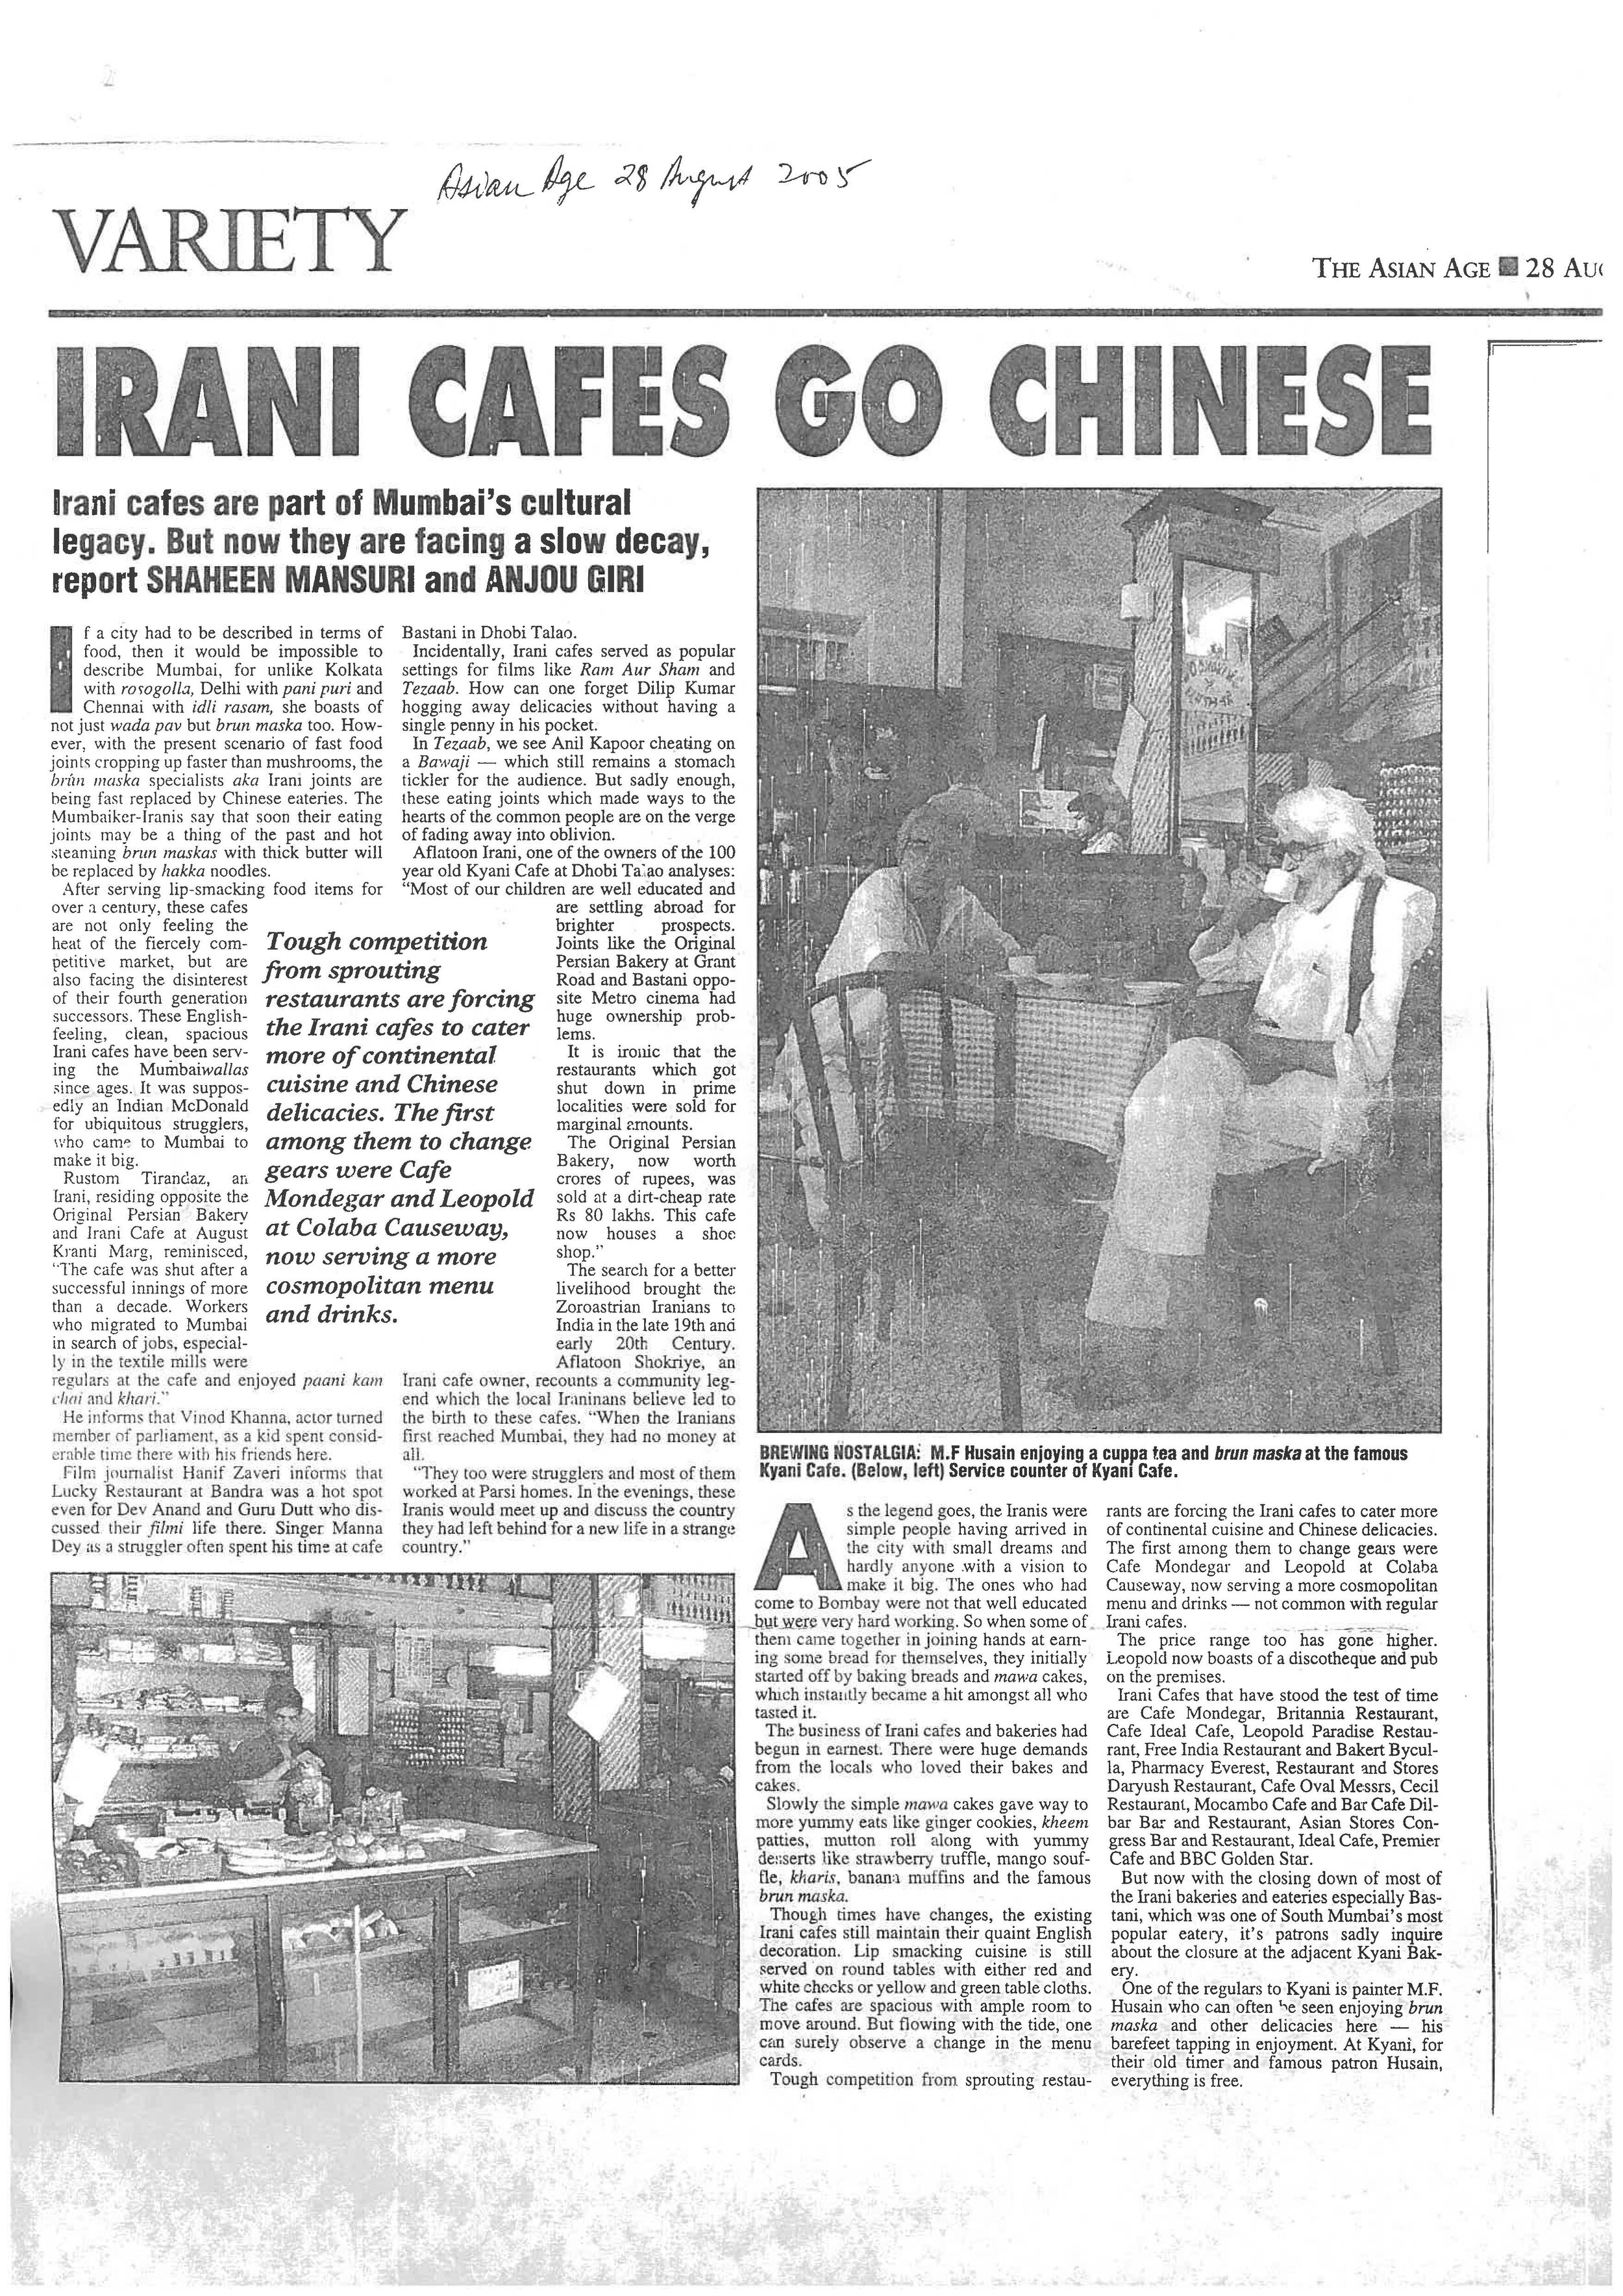 The Asian Age, 2005